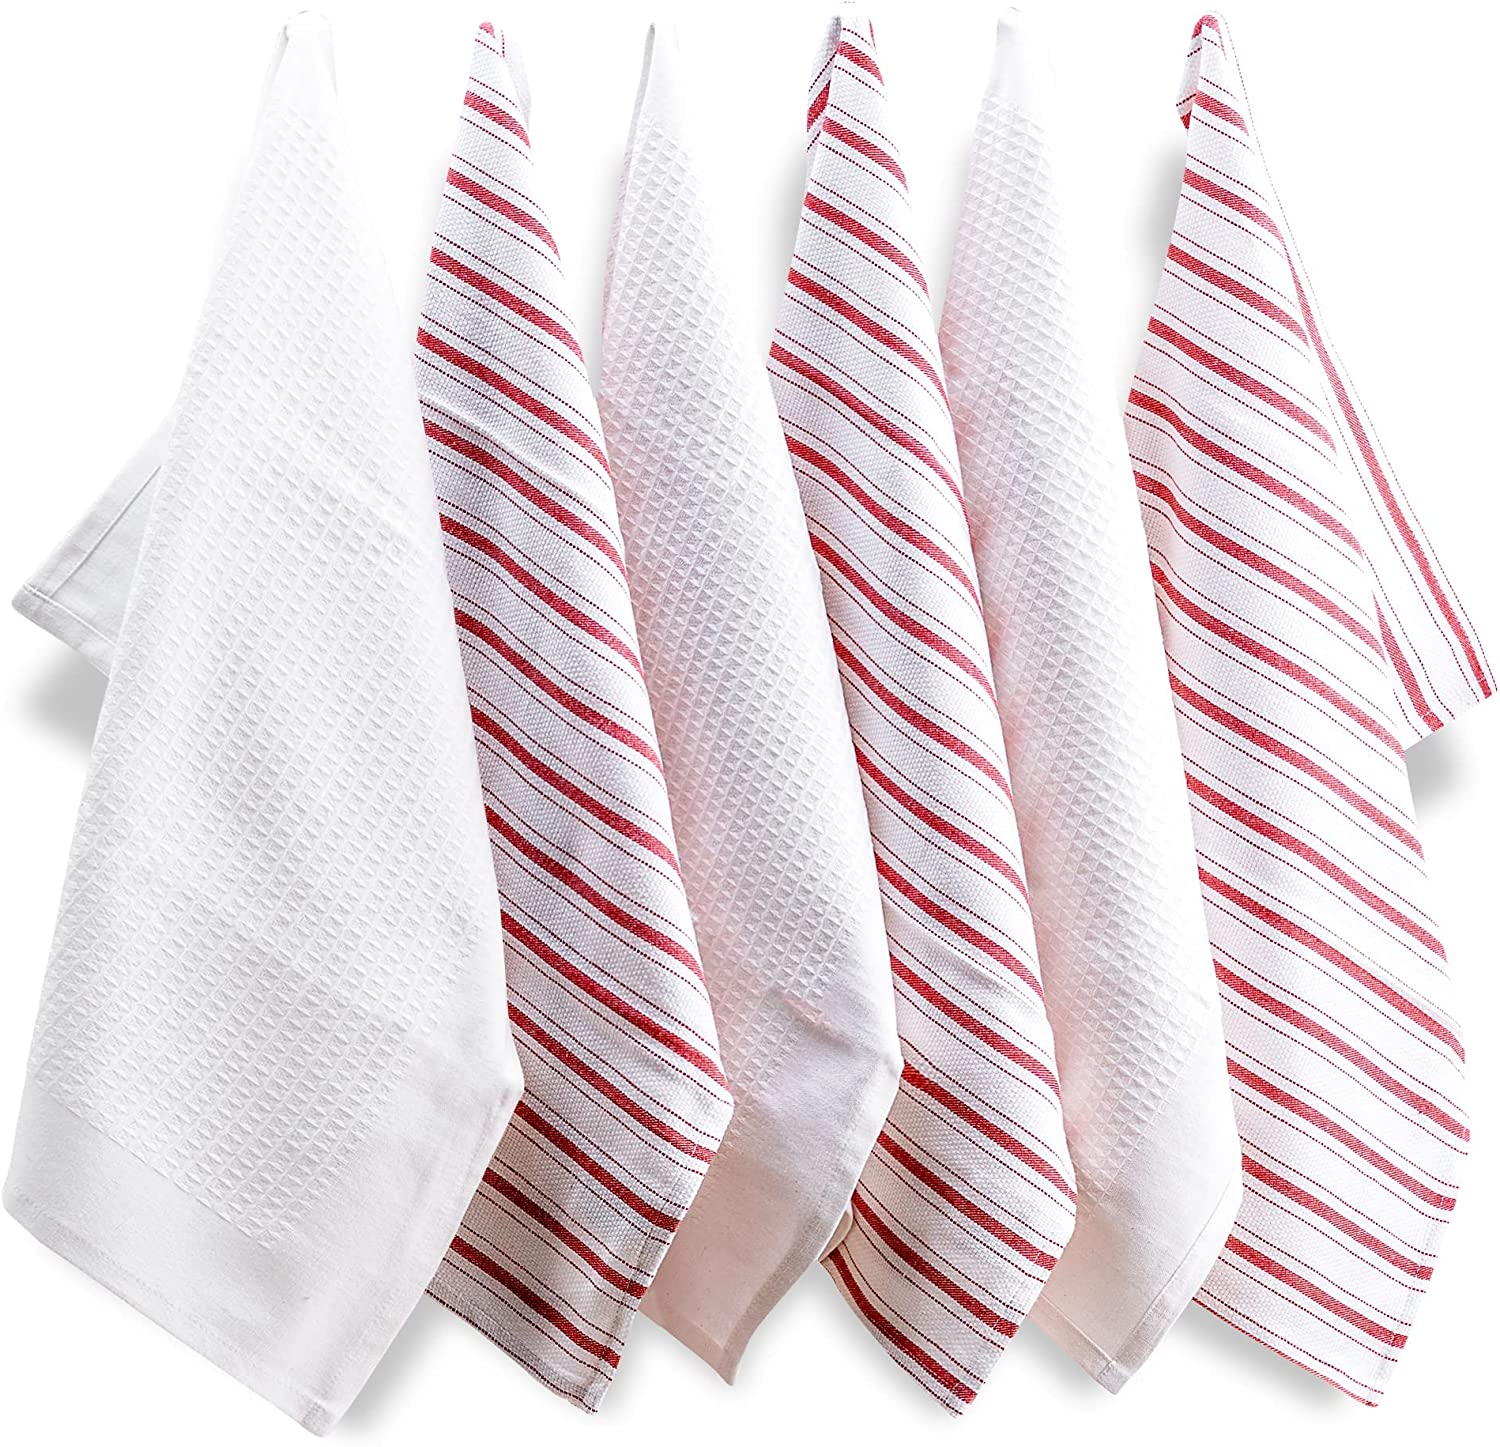 white plain dish towels, white with red stripe kitchen dish towels cotton.